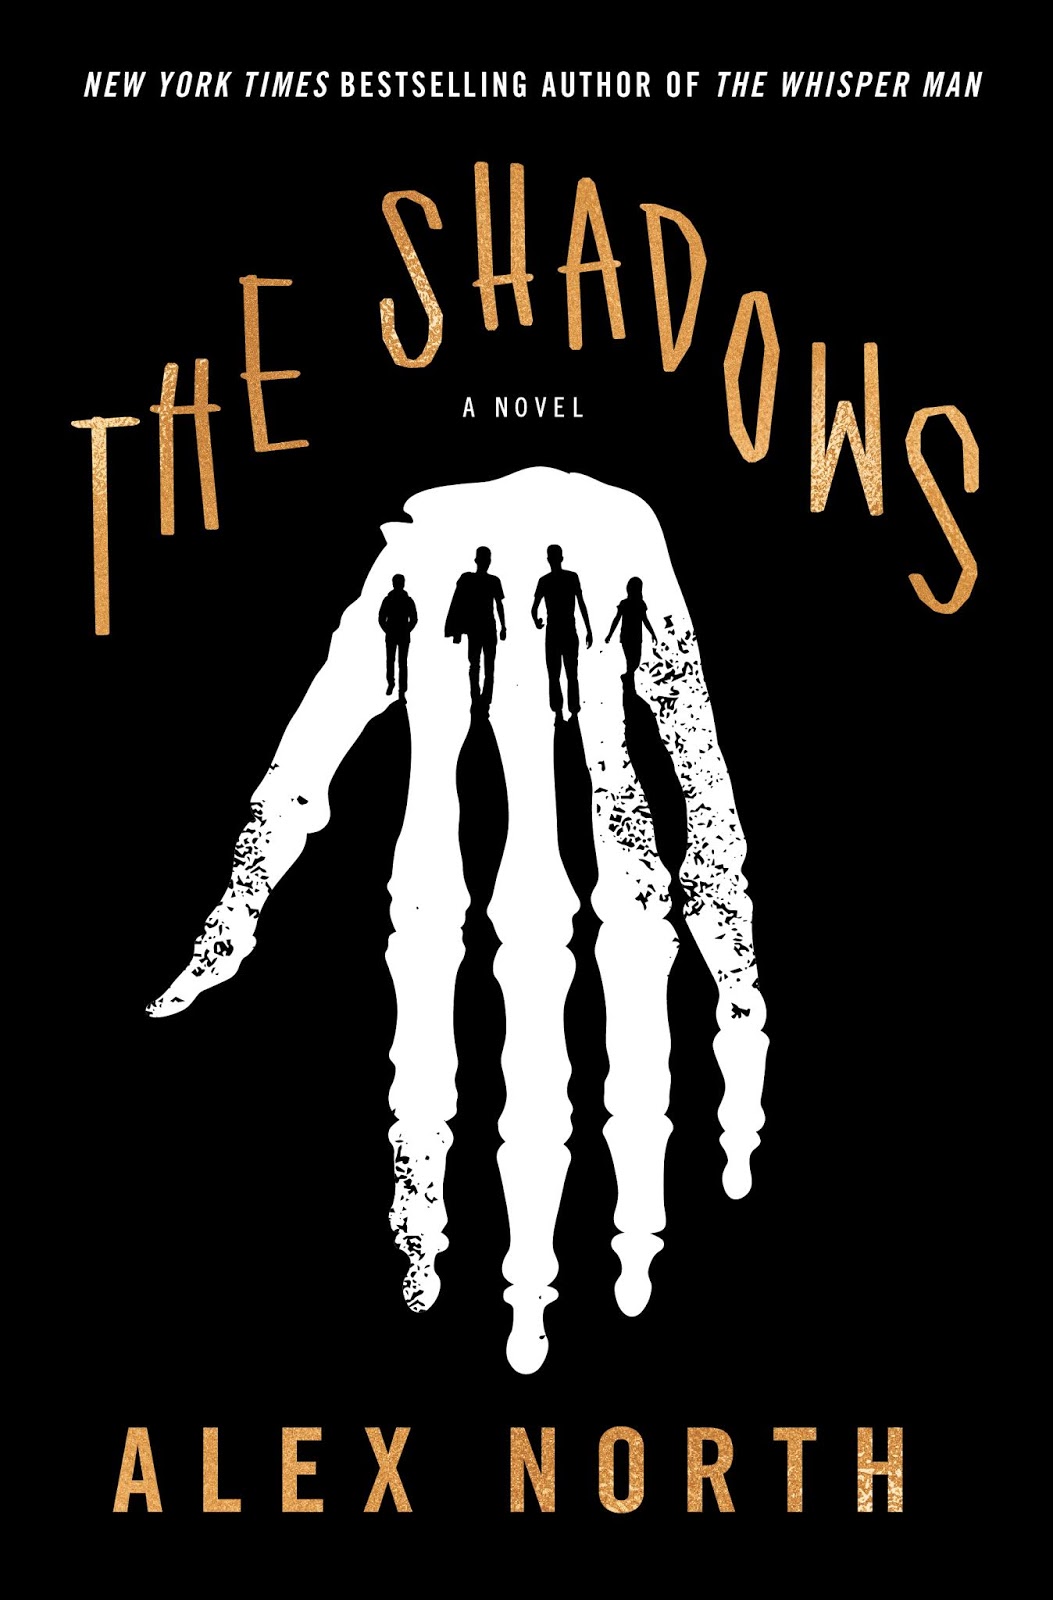 Review: The Shadows by Alex North